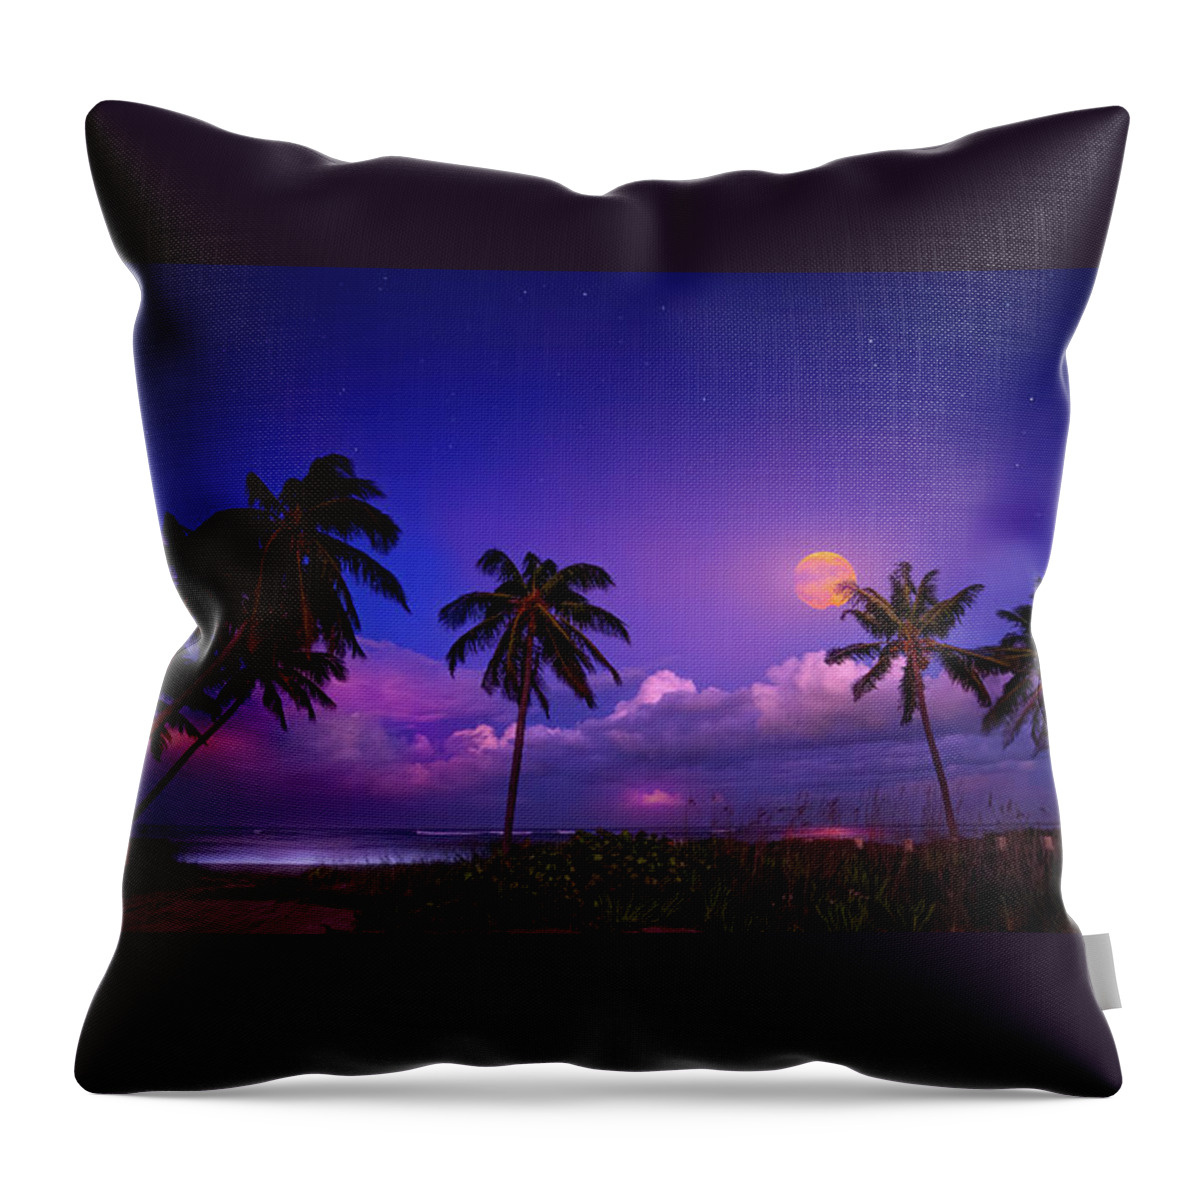 Moon Throw Pillow featuring the photograph The Moon Dancers by Mark Andrew Thomas